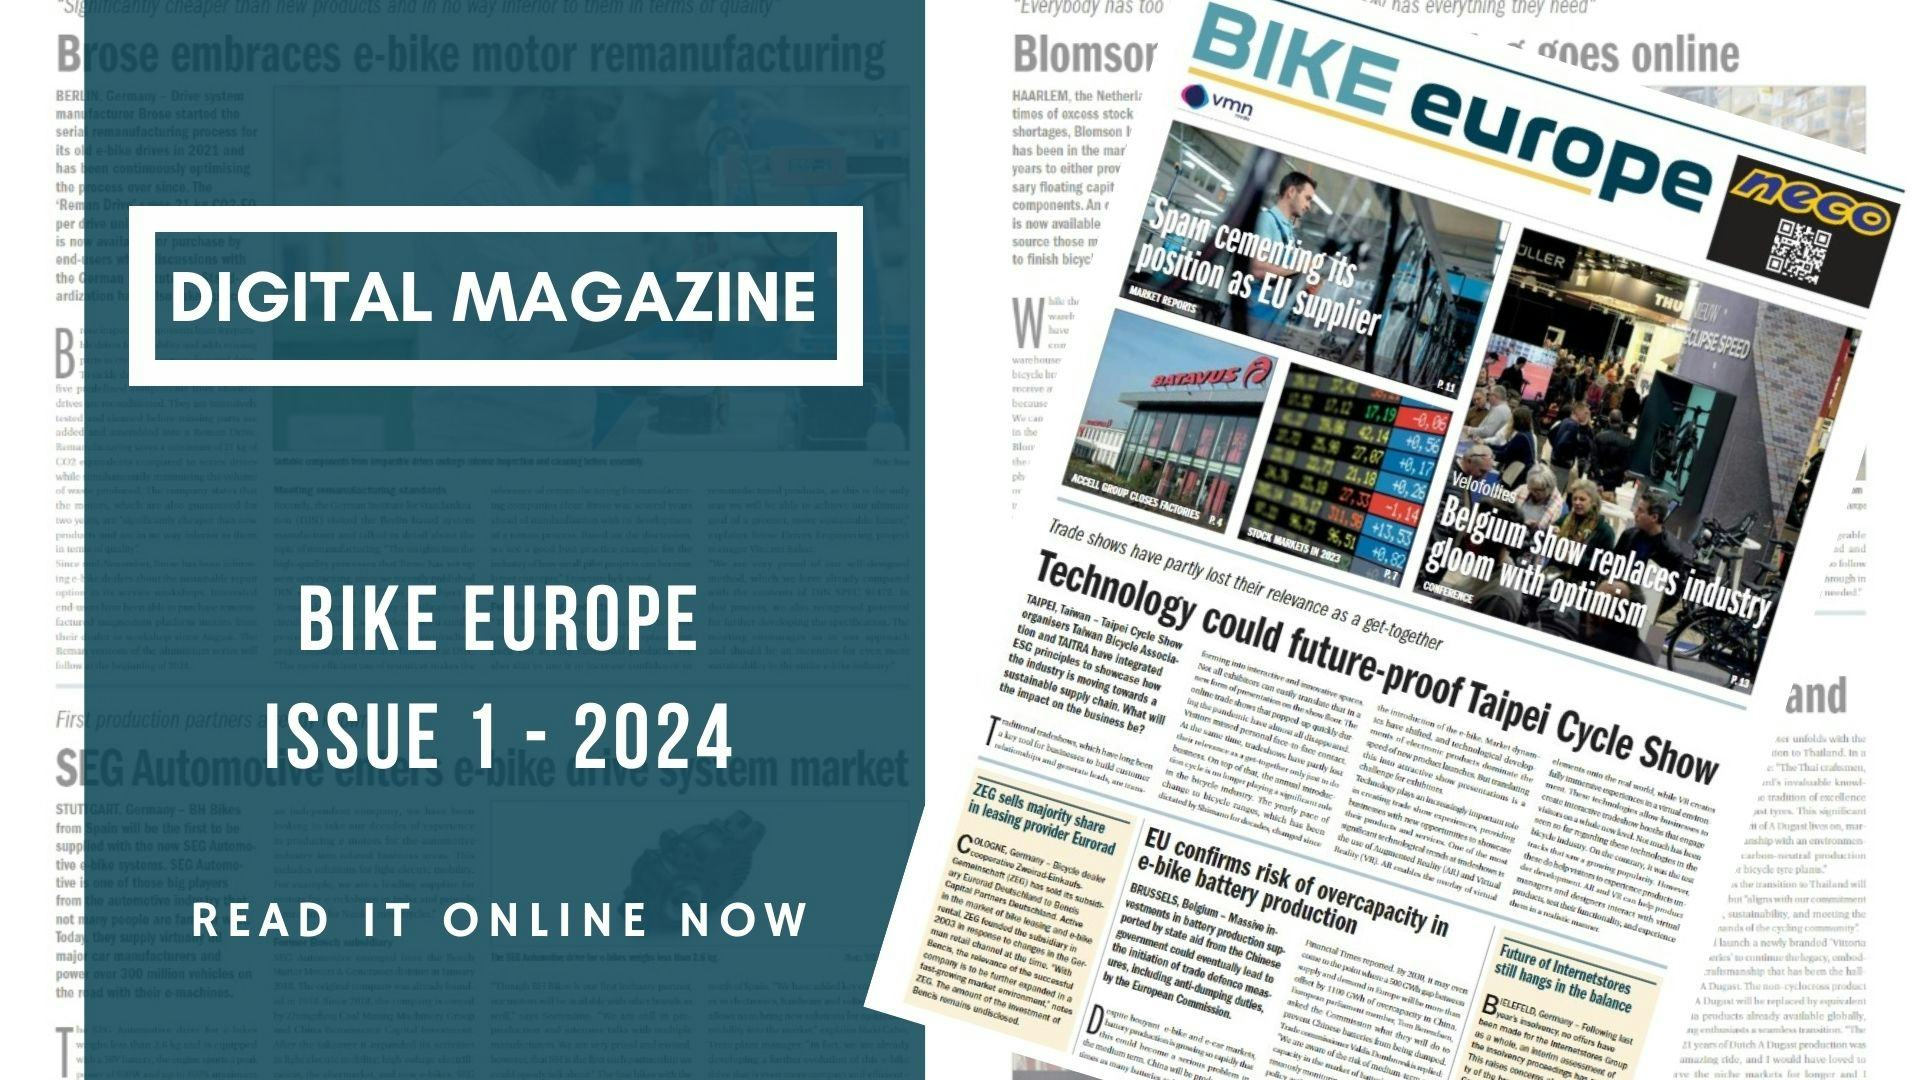 Bike Europe issue 1/2024 available online now